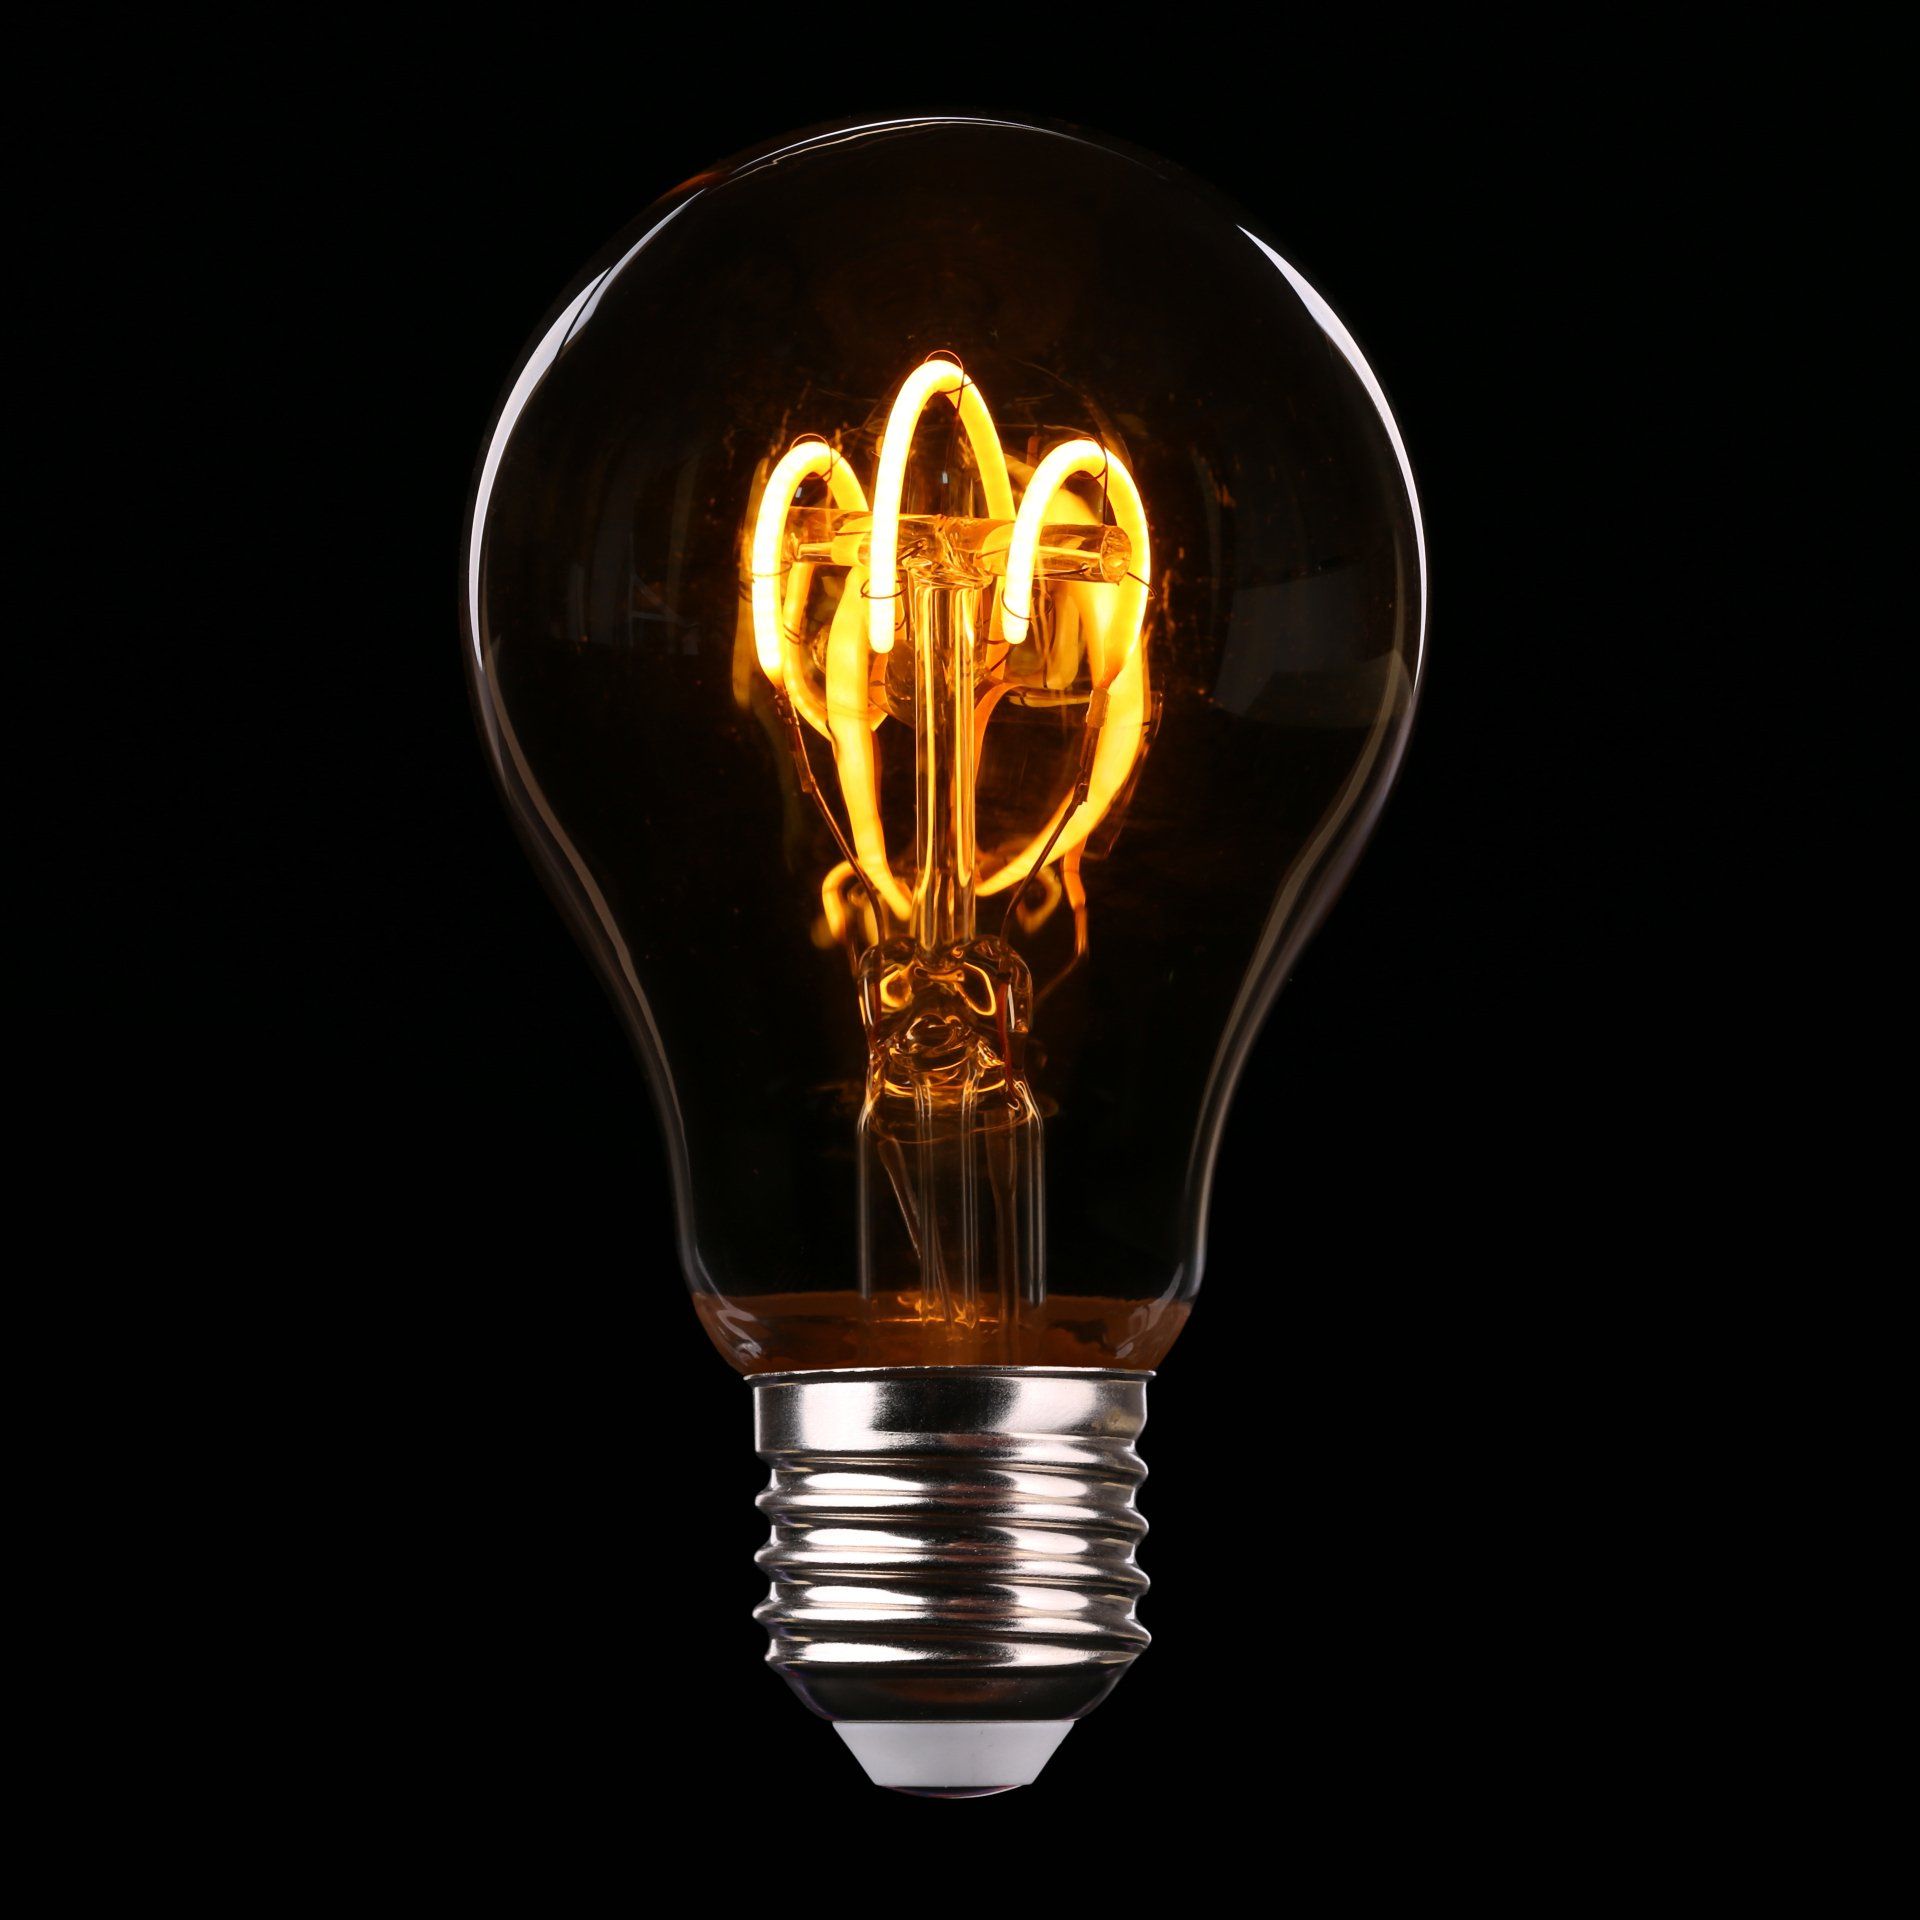 A picture of an illuminated lightbulb on a black background.